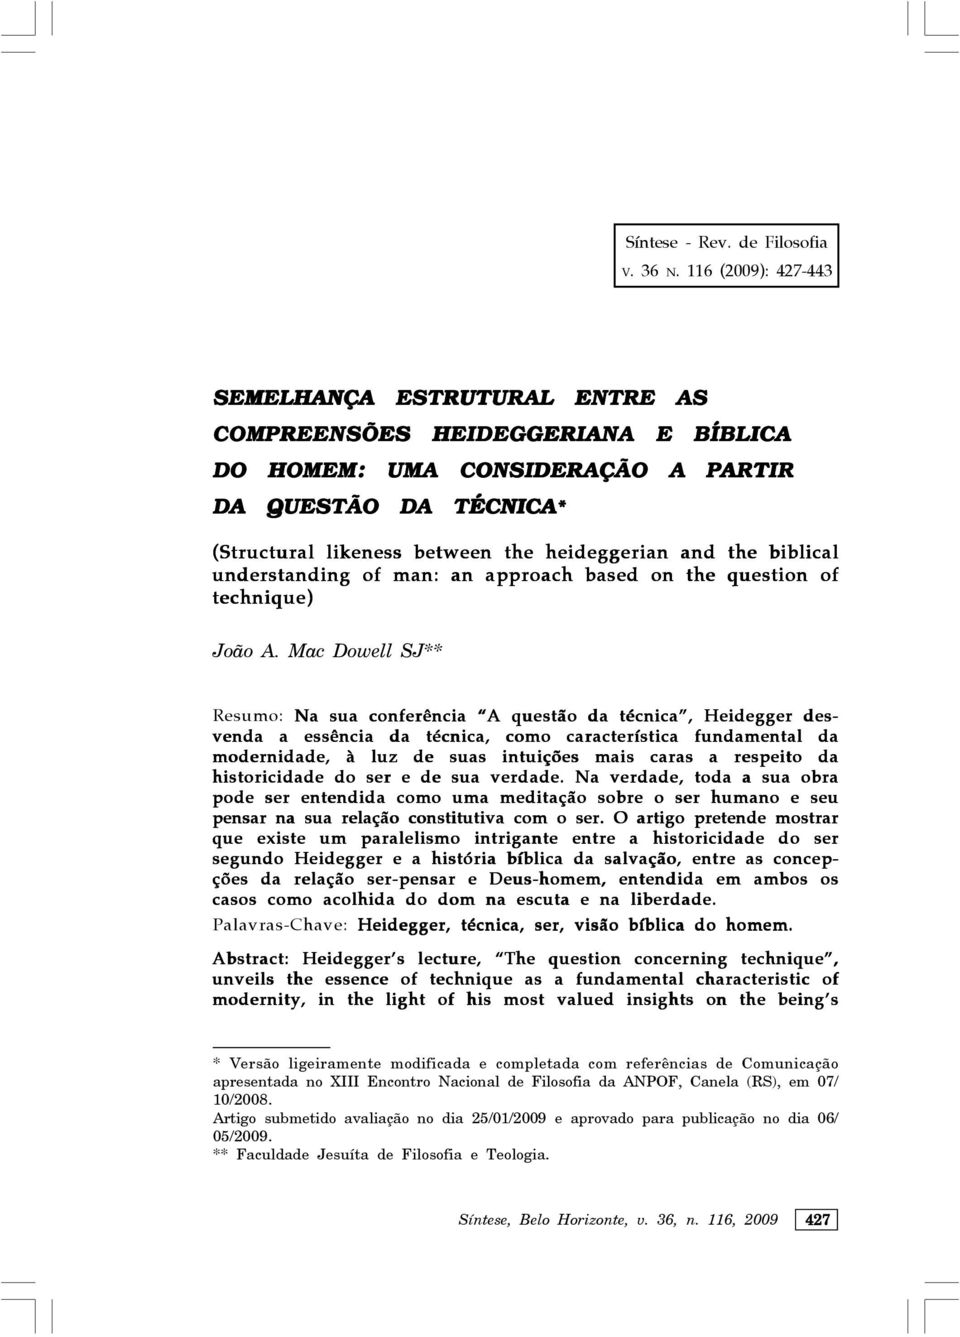 the biblical understanding of man: an approach based on the question of technique) João A.